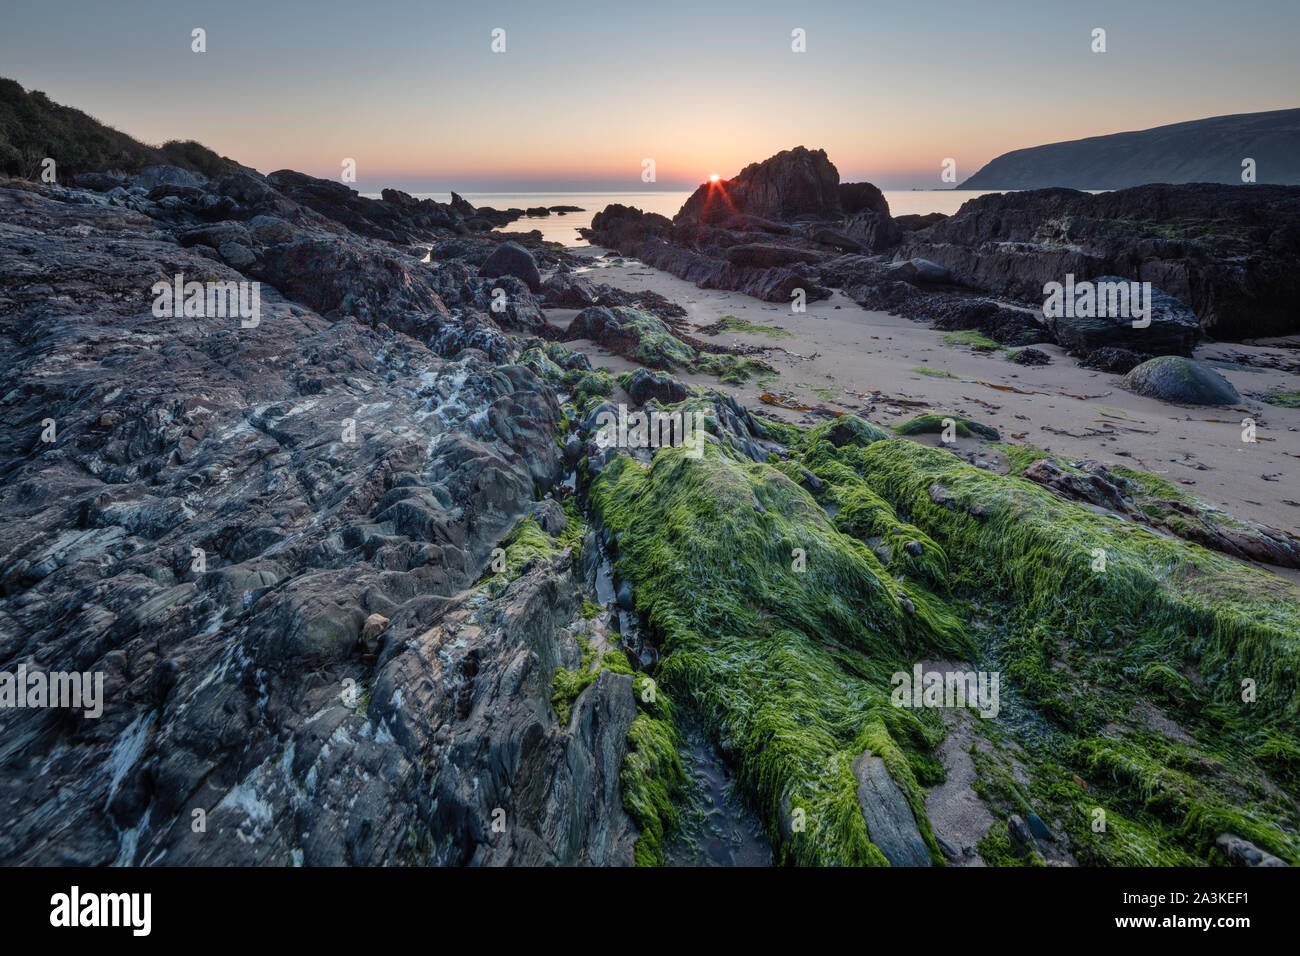 Rocks encrusted with seaweed and lichen on the beach at Kinnagoe Bay at sunrise, Inishowen Peninsula, Co Donegal, Ireland Stock Photo